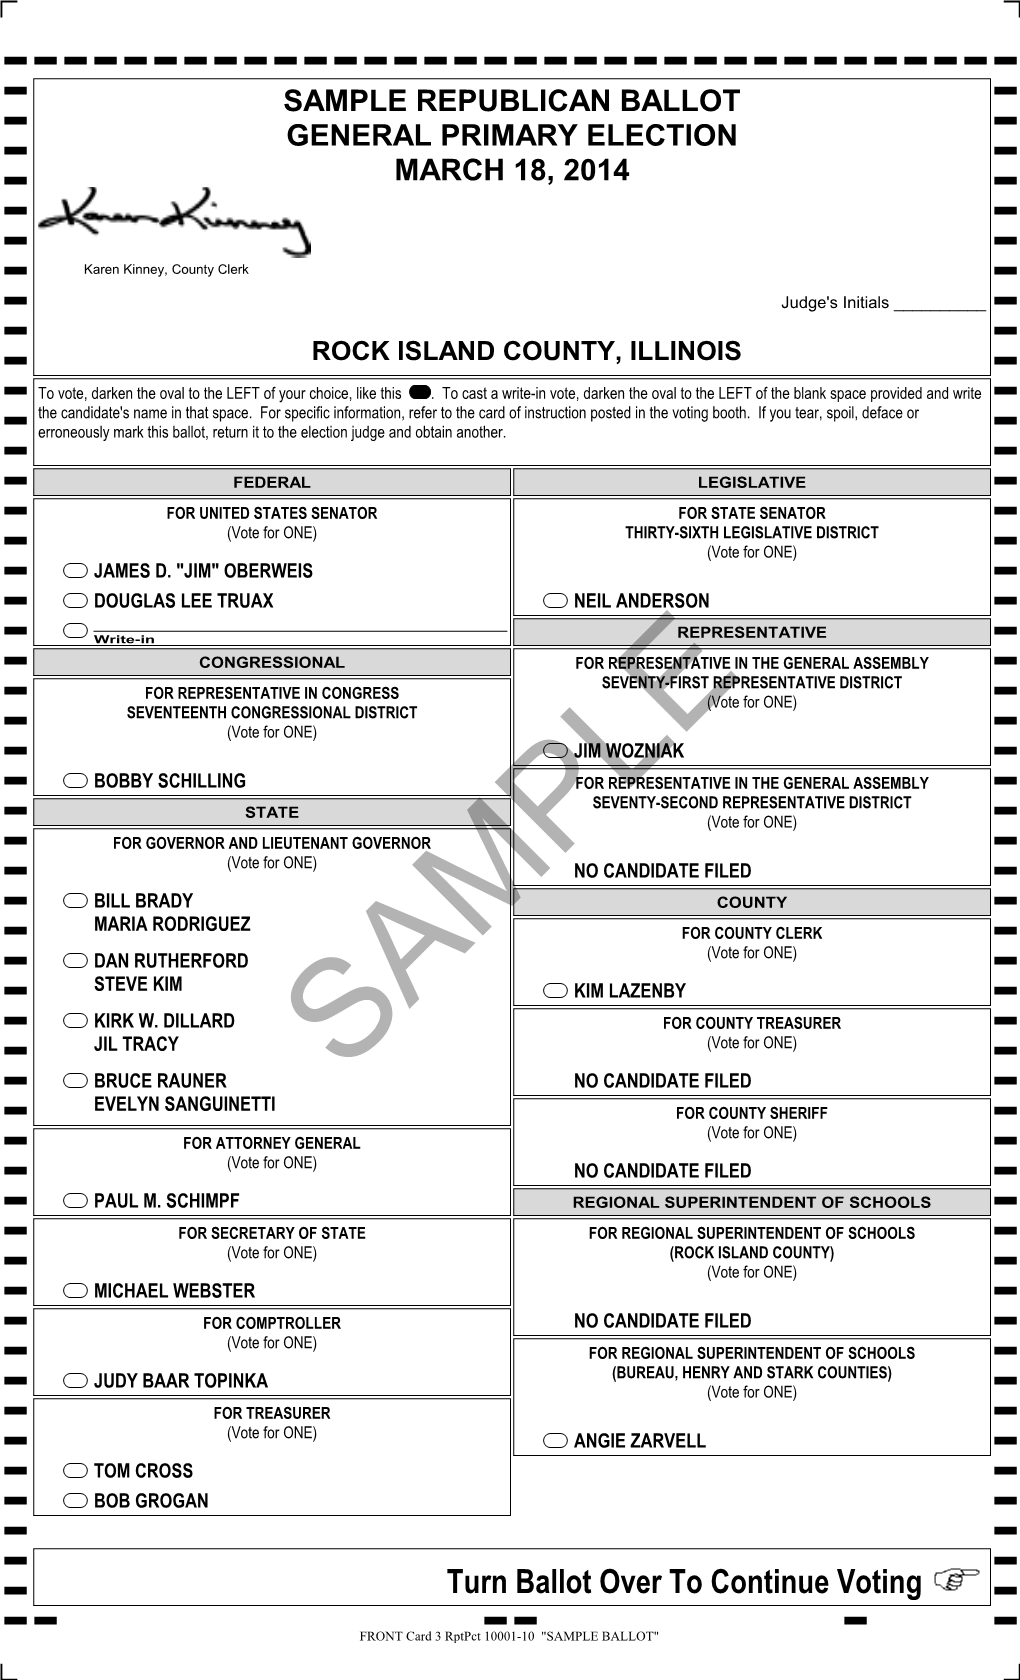 Turn Ballot Over to Continue Voting